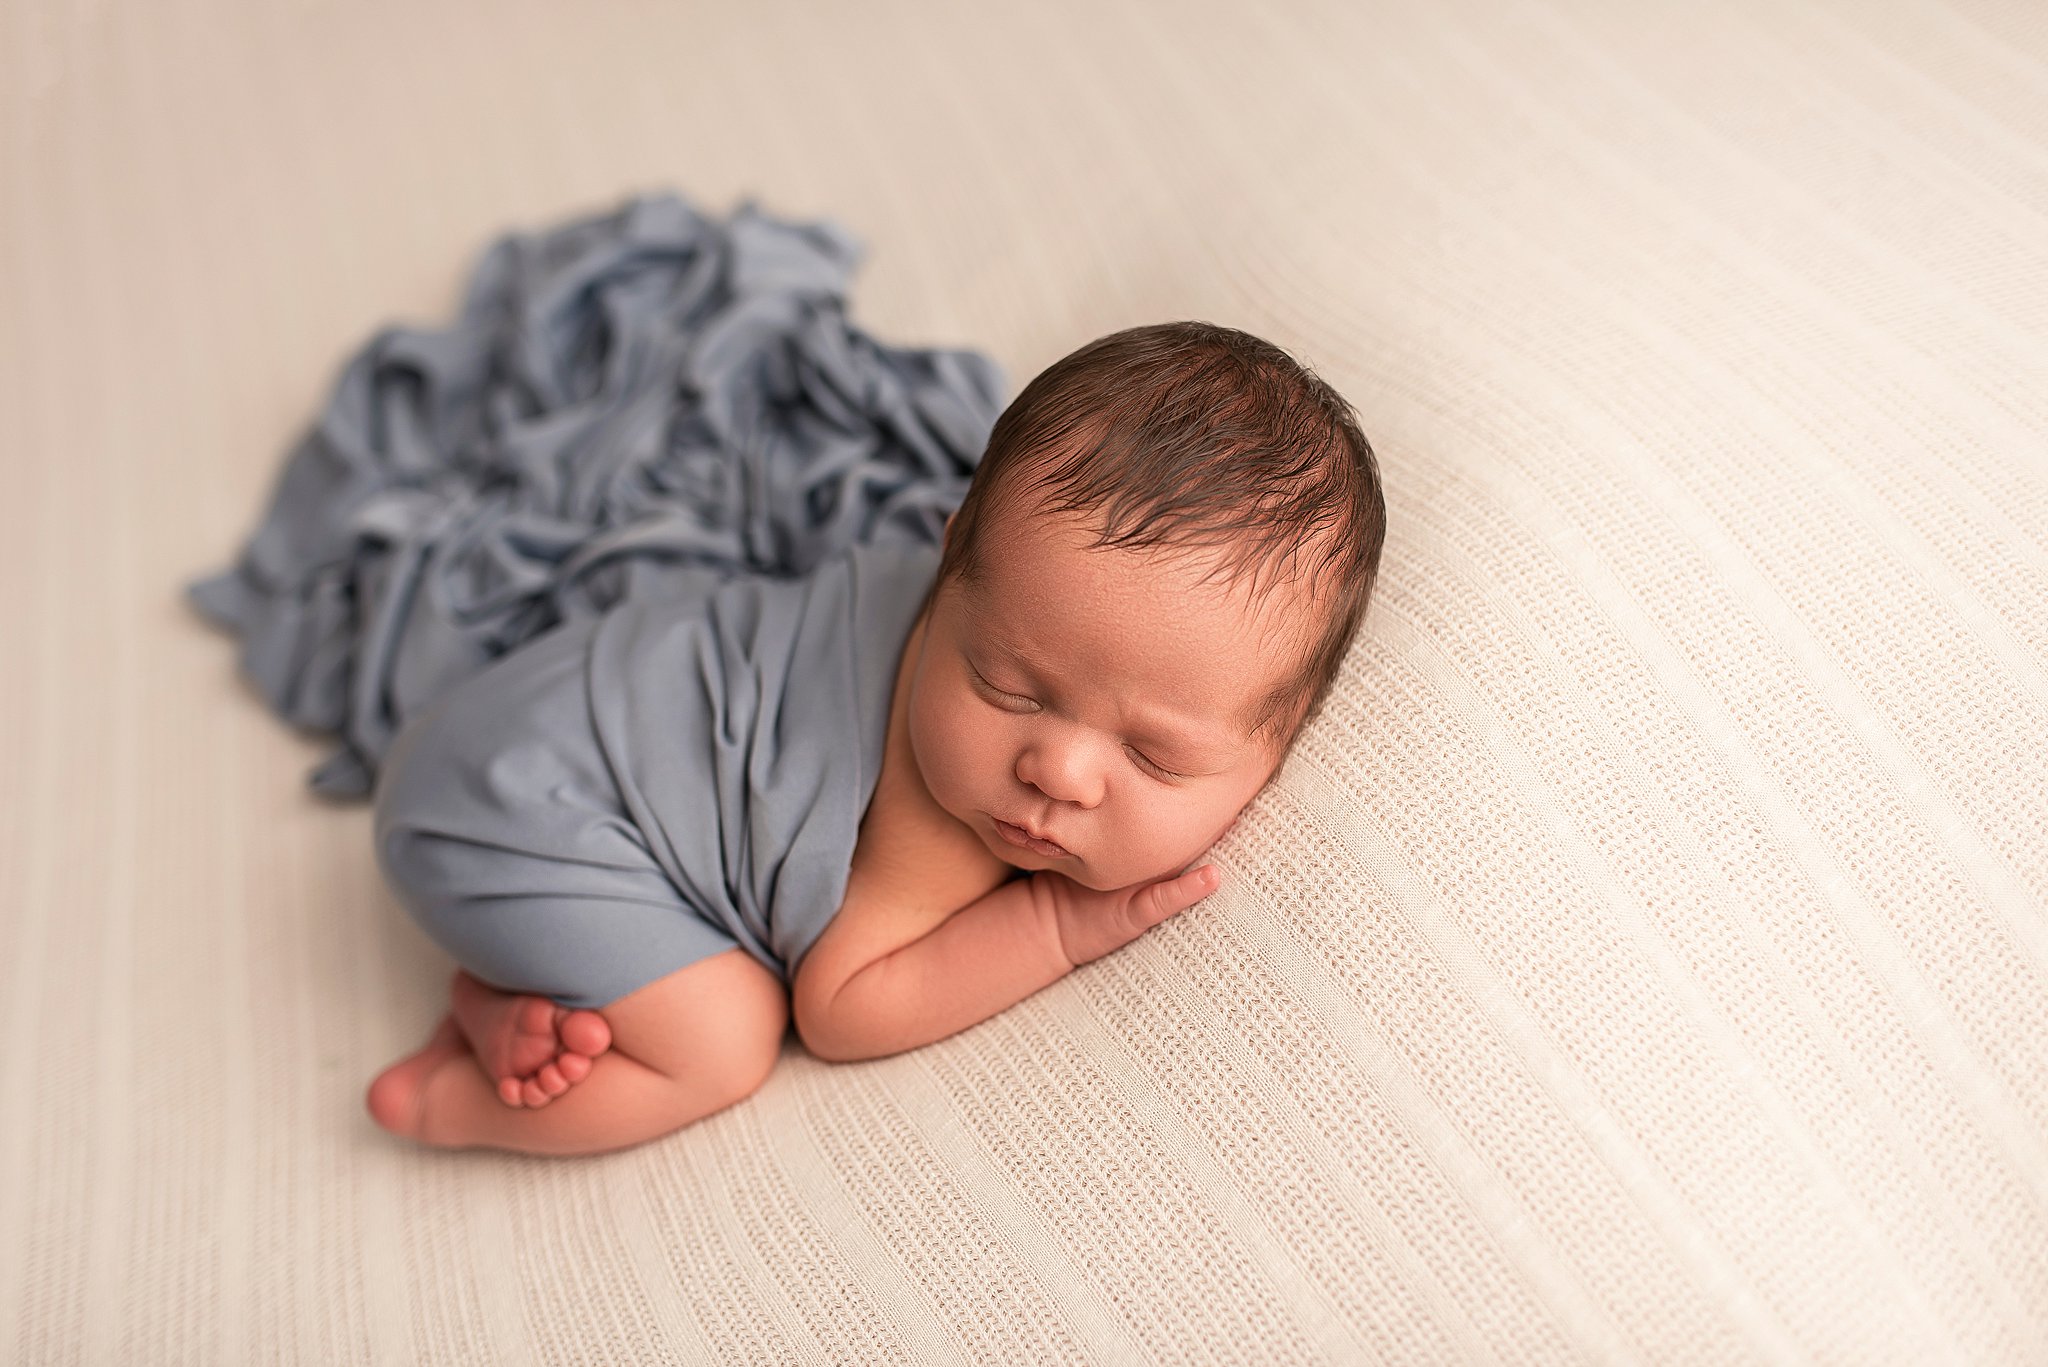 A newborn baby sleeps in froggy pose while wrapped in a blue blanket